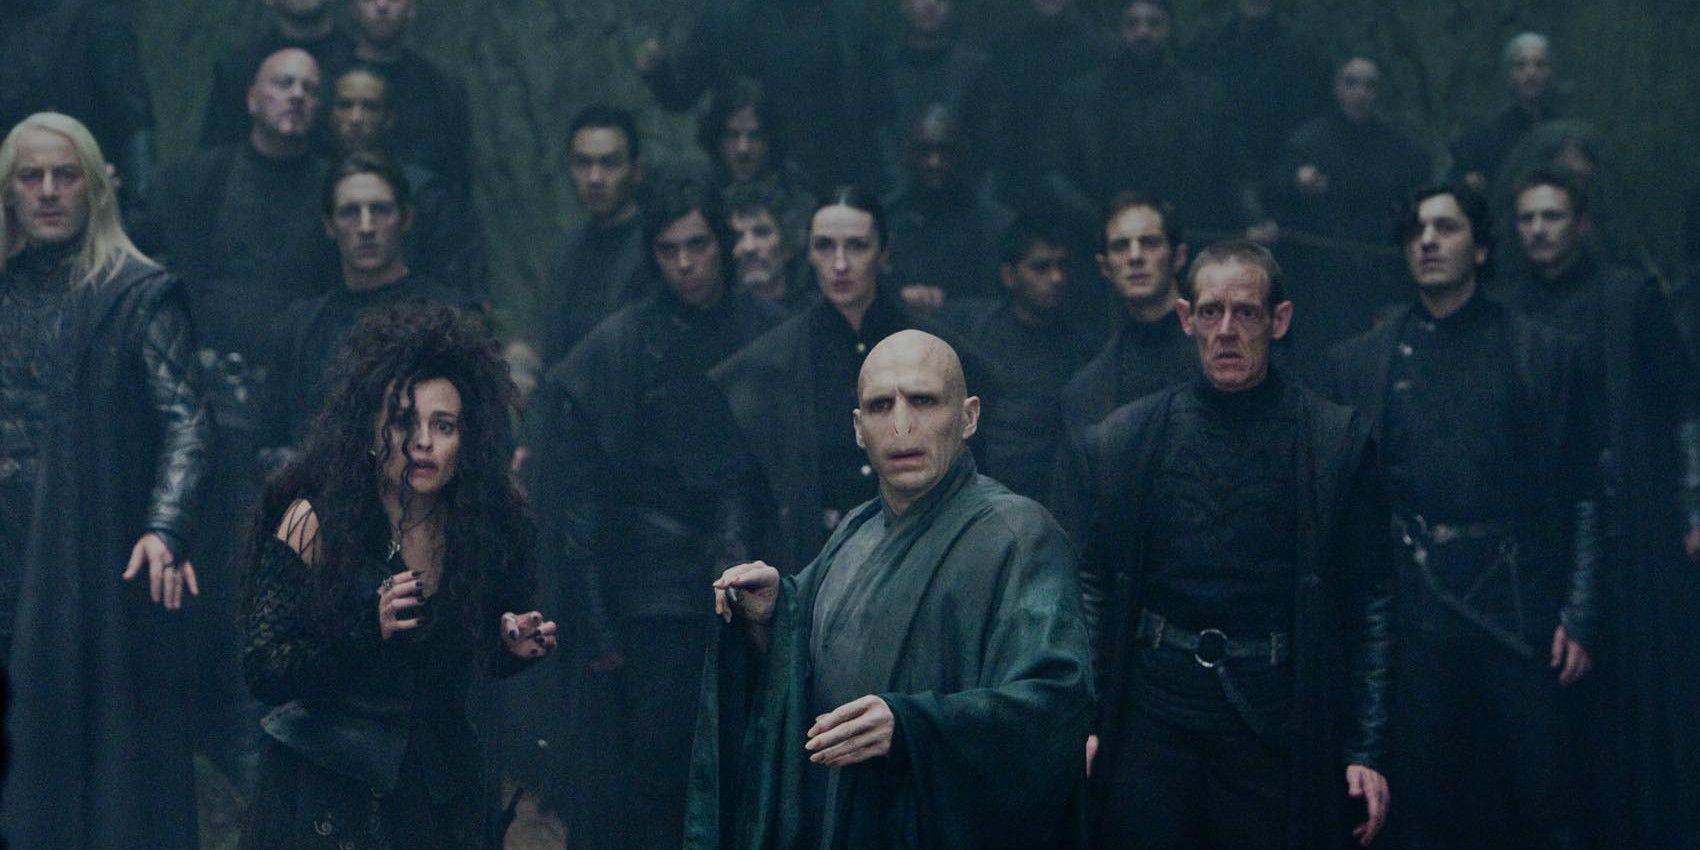 Voldemort and Bellatrix standing in front of an army of Death Eaters in The Deathly Hallows.